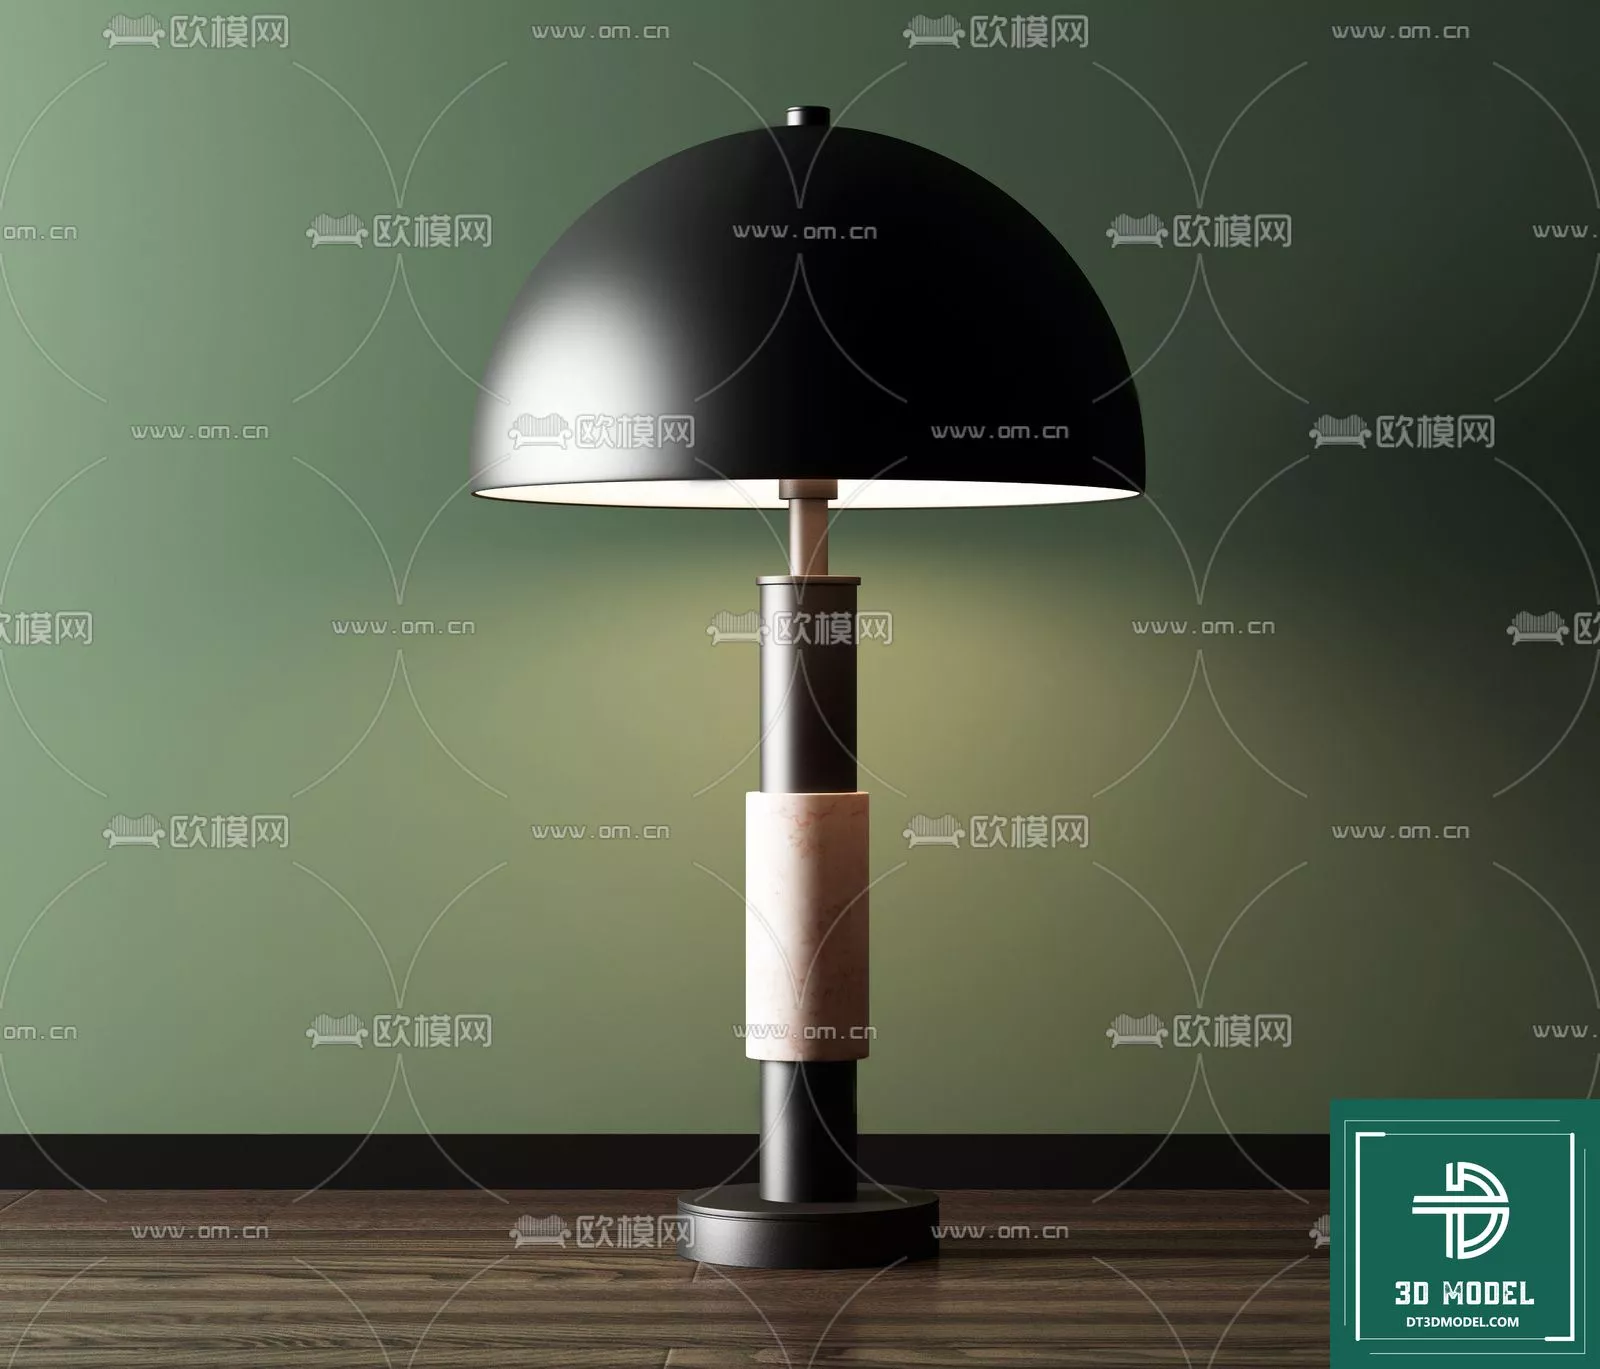 MODERN TABLE LAMP - SKETCHUP 3D MODEL - VRAY OR ENSCAPE - ID14610